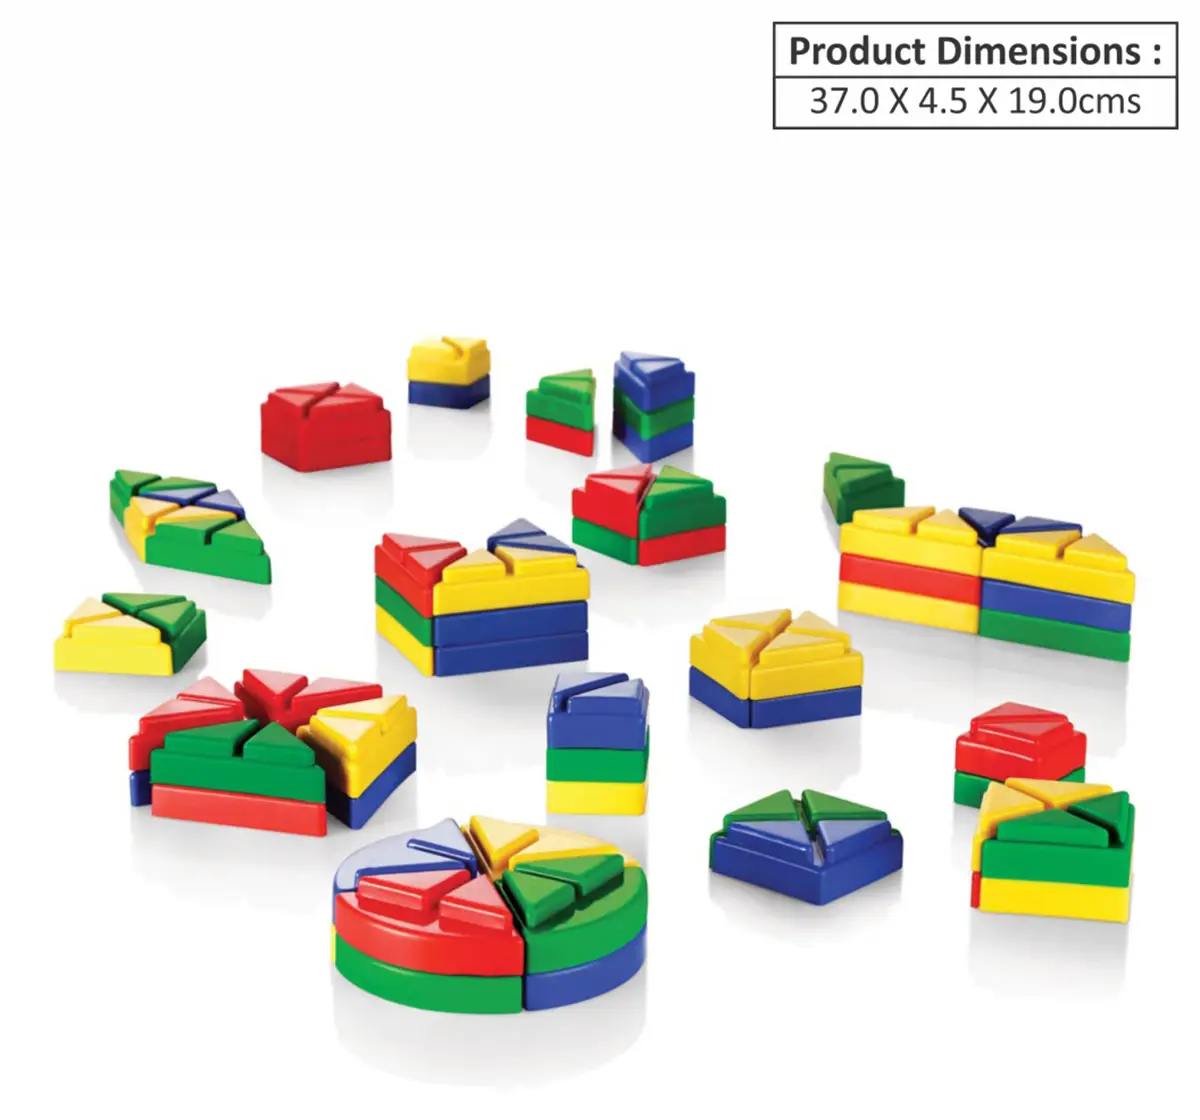 Ok Play Creat a Shape Interlocking blocks Early Learning Educational Toy for Kids Multicolor 3Y+